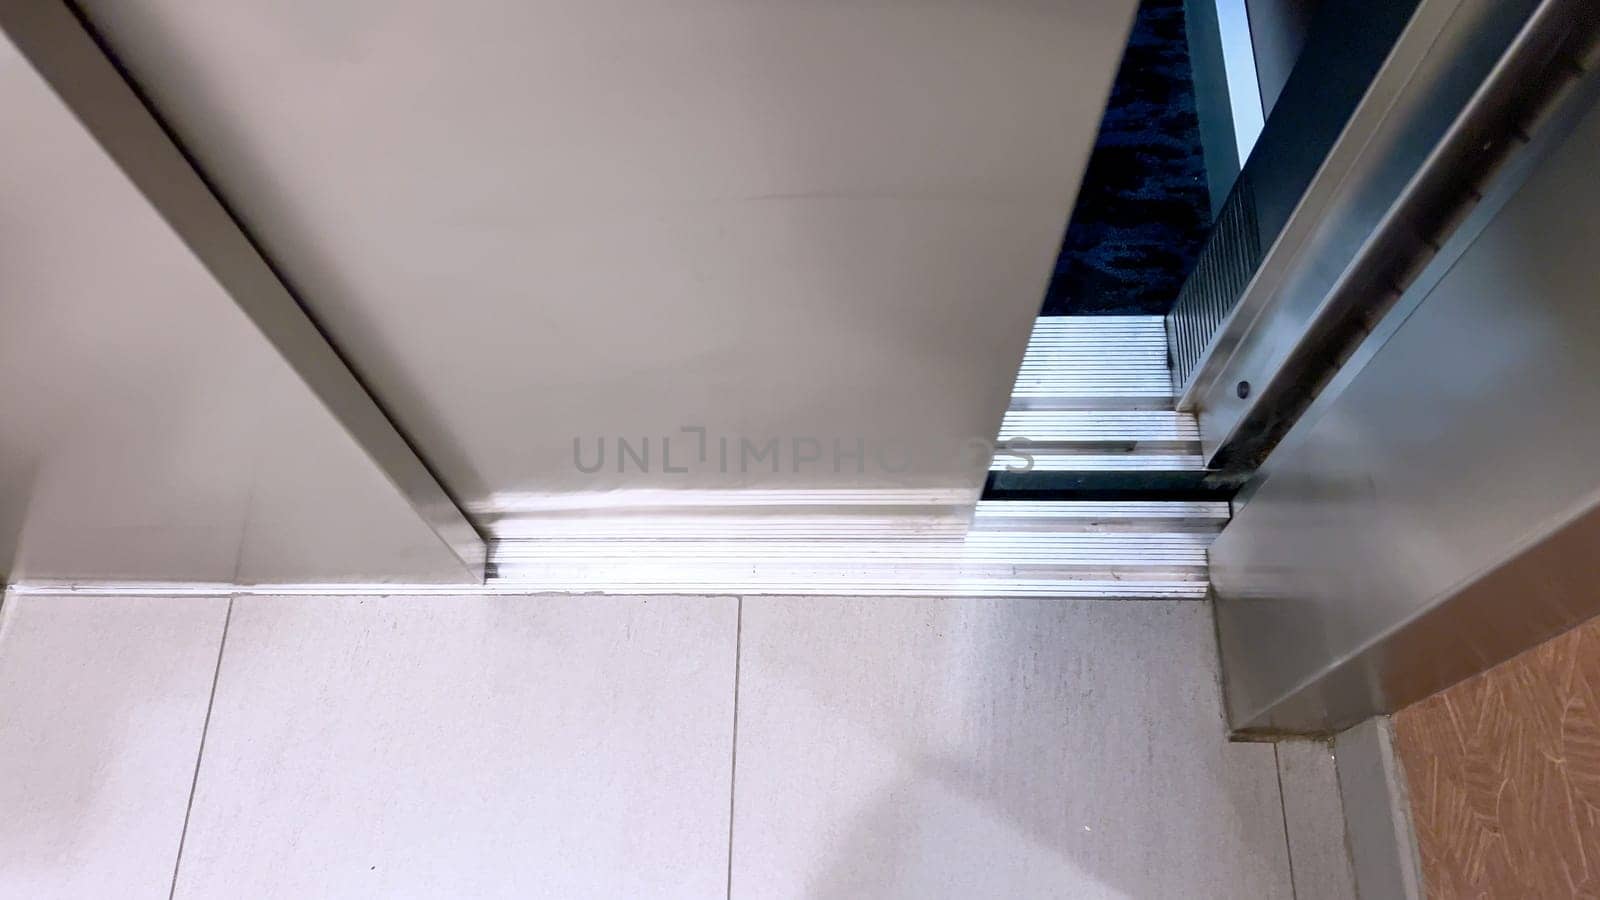 The detailed view of an elevator threshold where the cabin meets the building floor, highlighting the transition space that facilitates safe entry and exit.